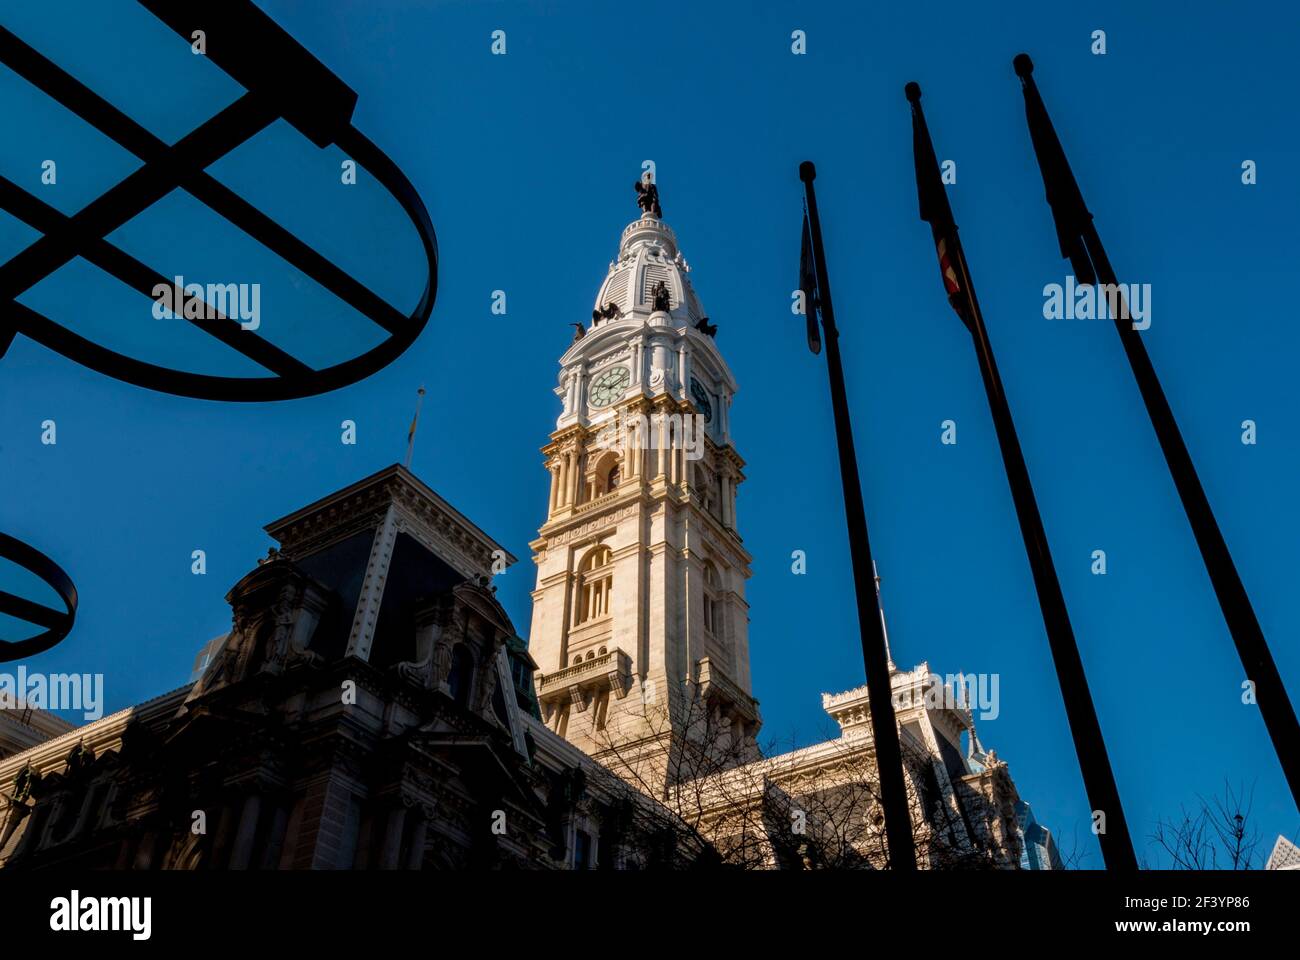 Looking up at he tower of City Hall Philadelphia Pennsylvania Stock Photo